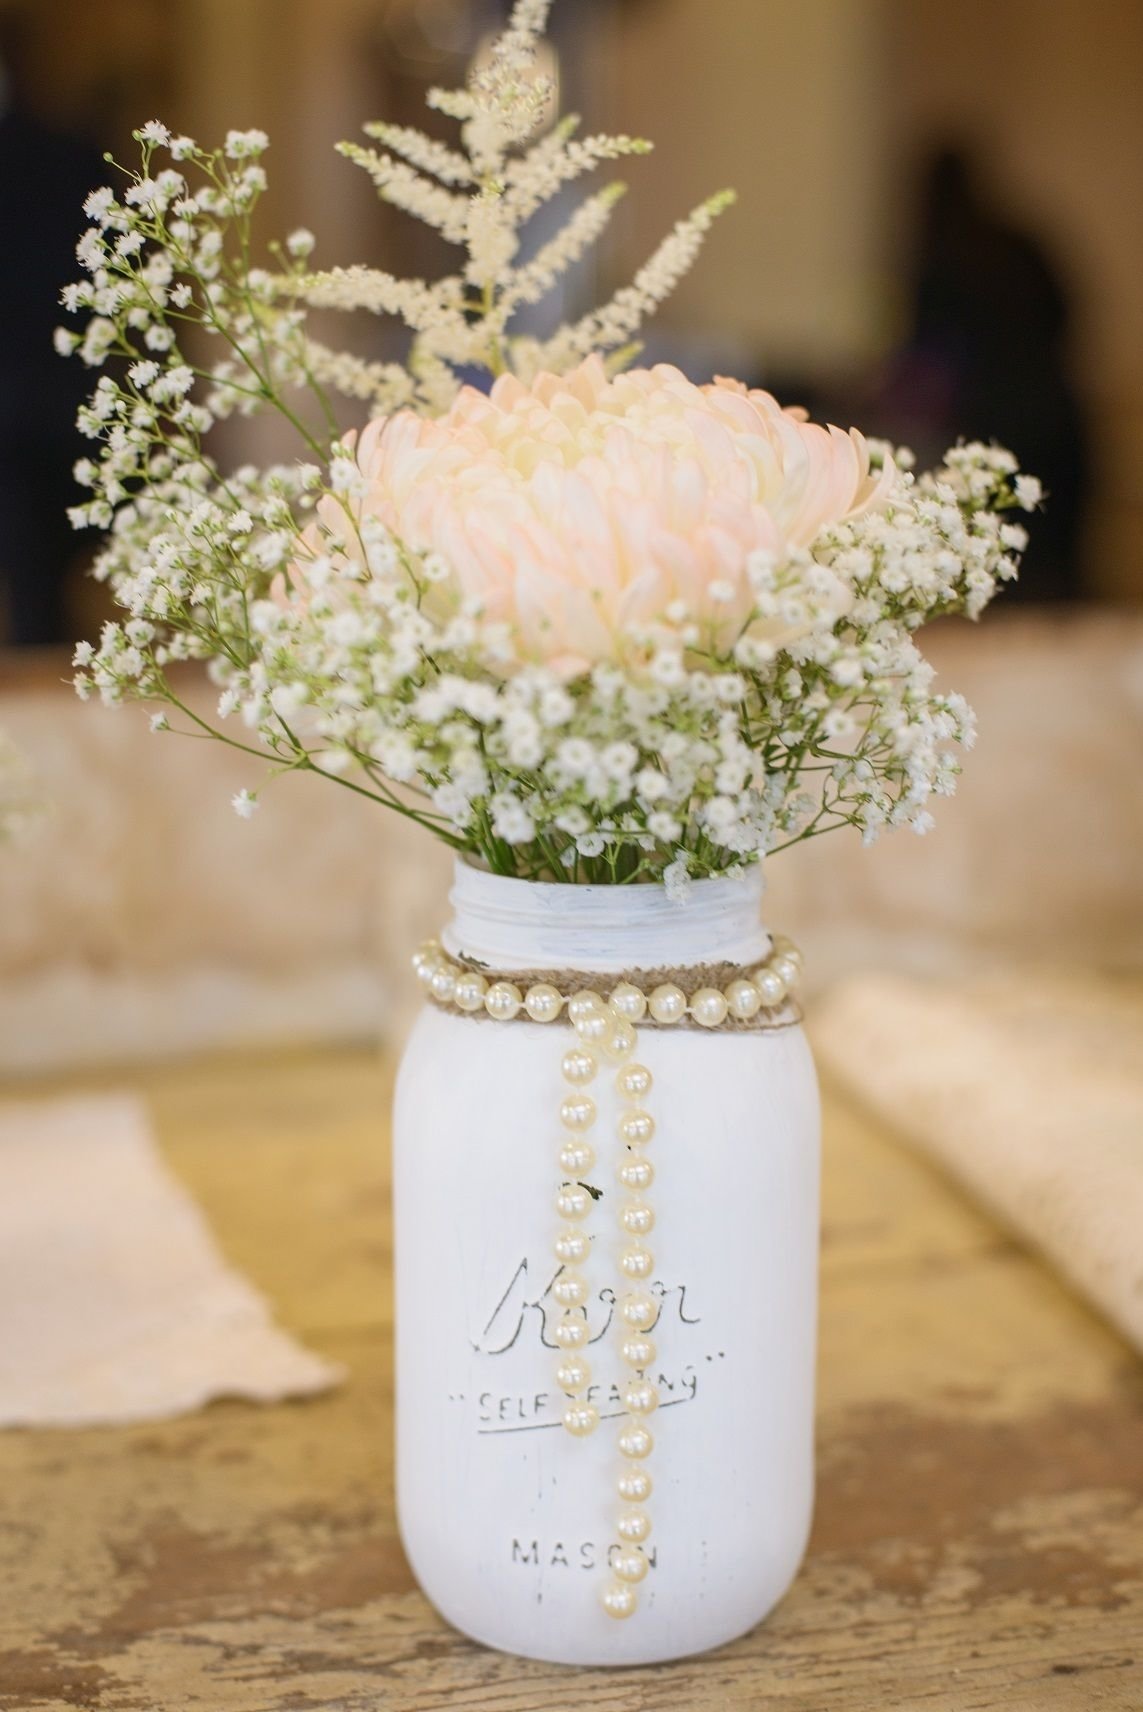 10 Pretty Mason Jar Ideas For Wedding centerpieces dont have to be expensive diy your reception 1 2022